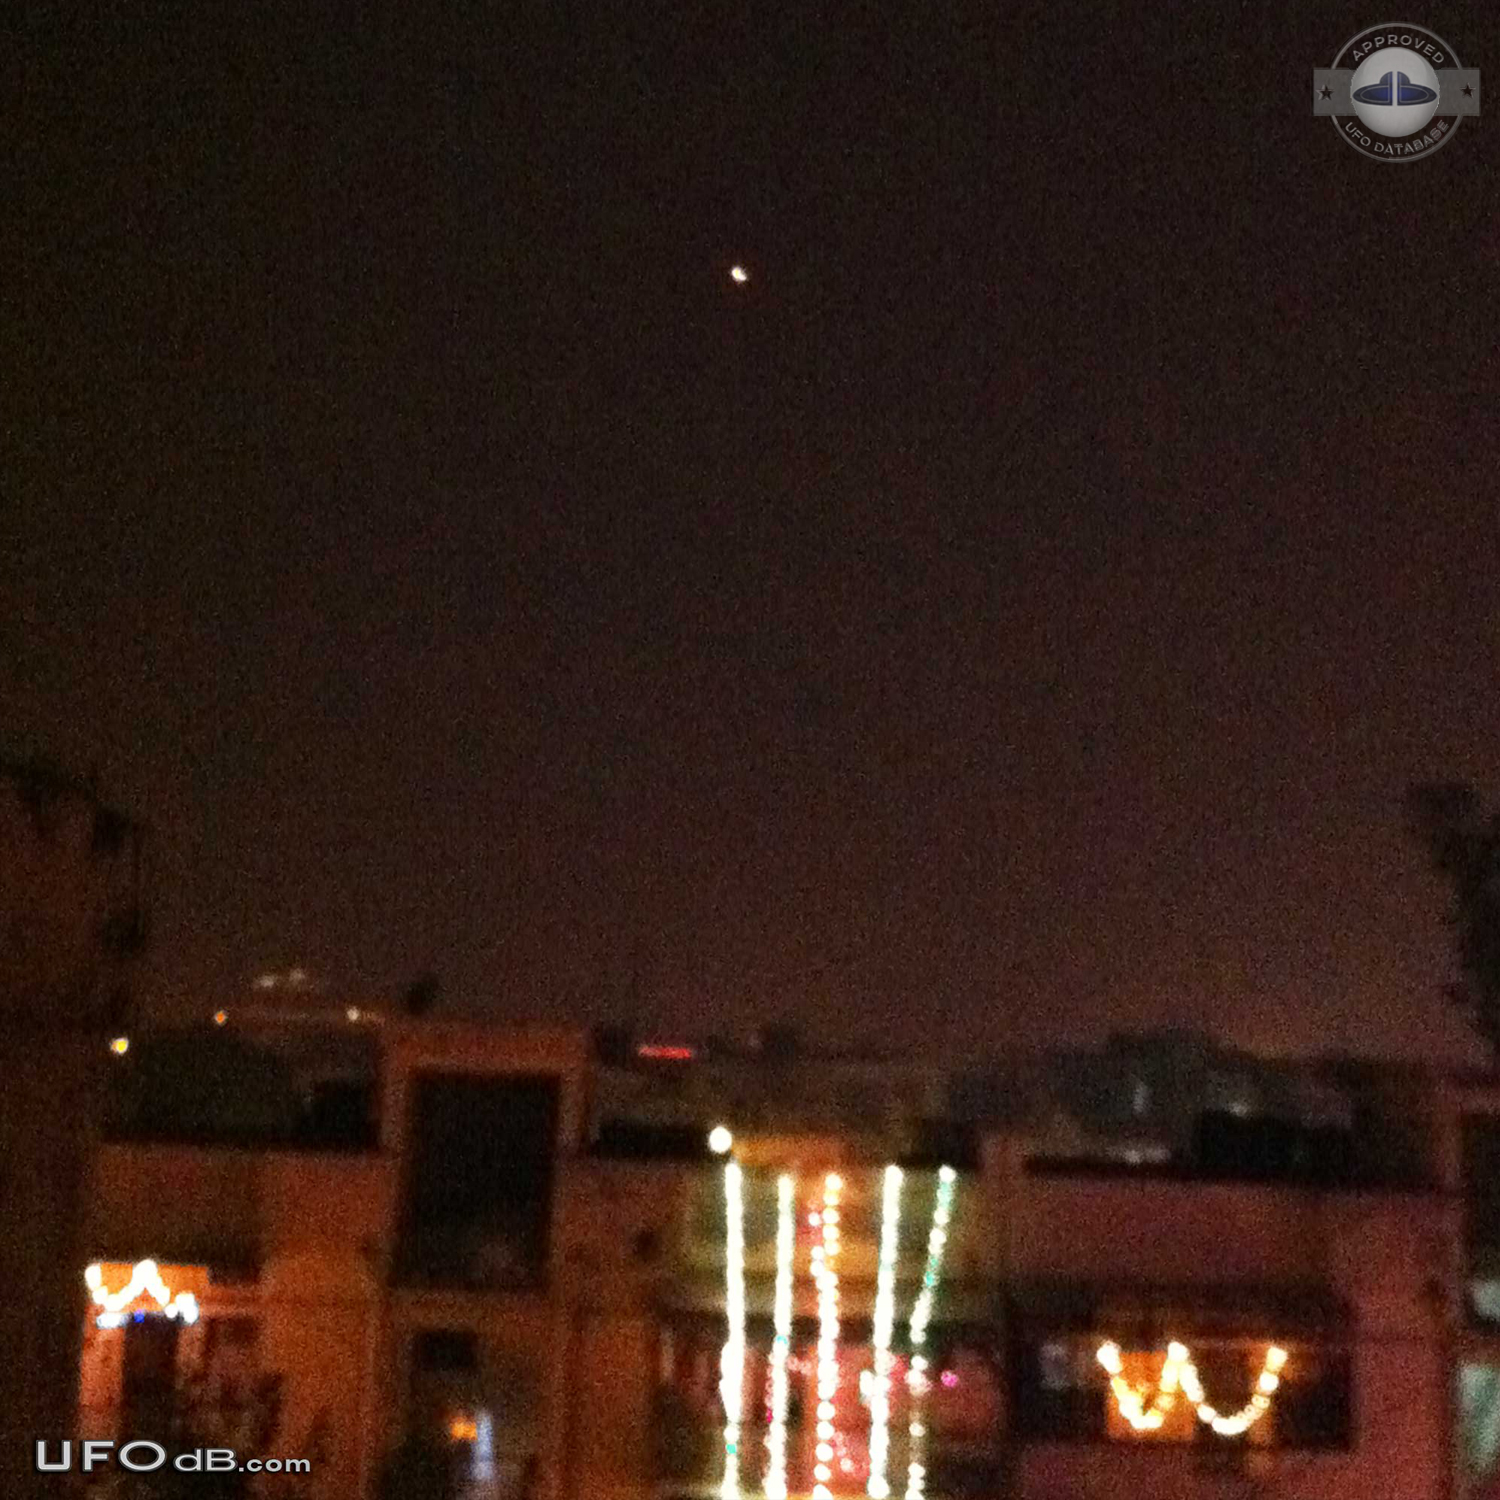 Sphere UFOs appear beside Fireworks during Diwali in New Delhi - 2011 UFO Picture #475-1